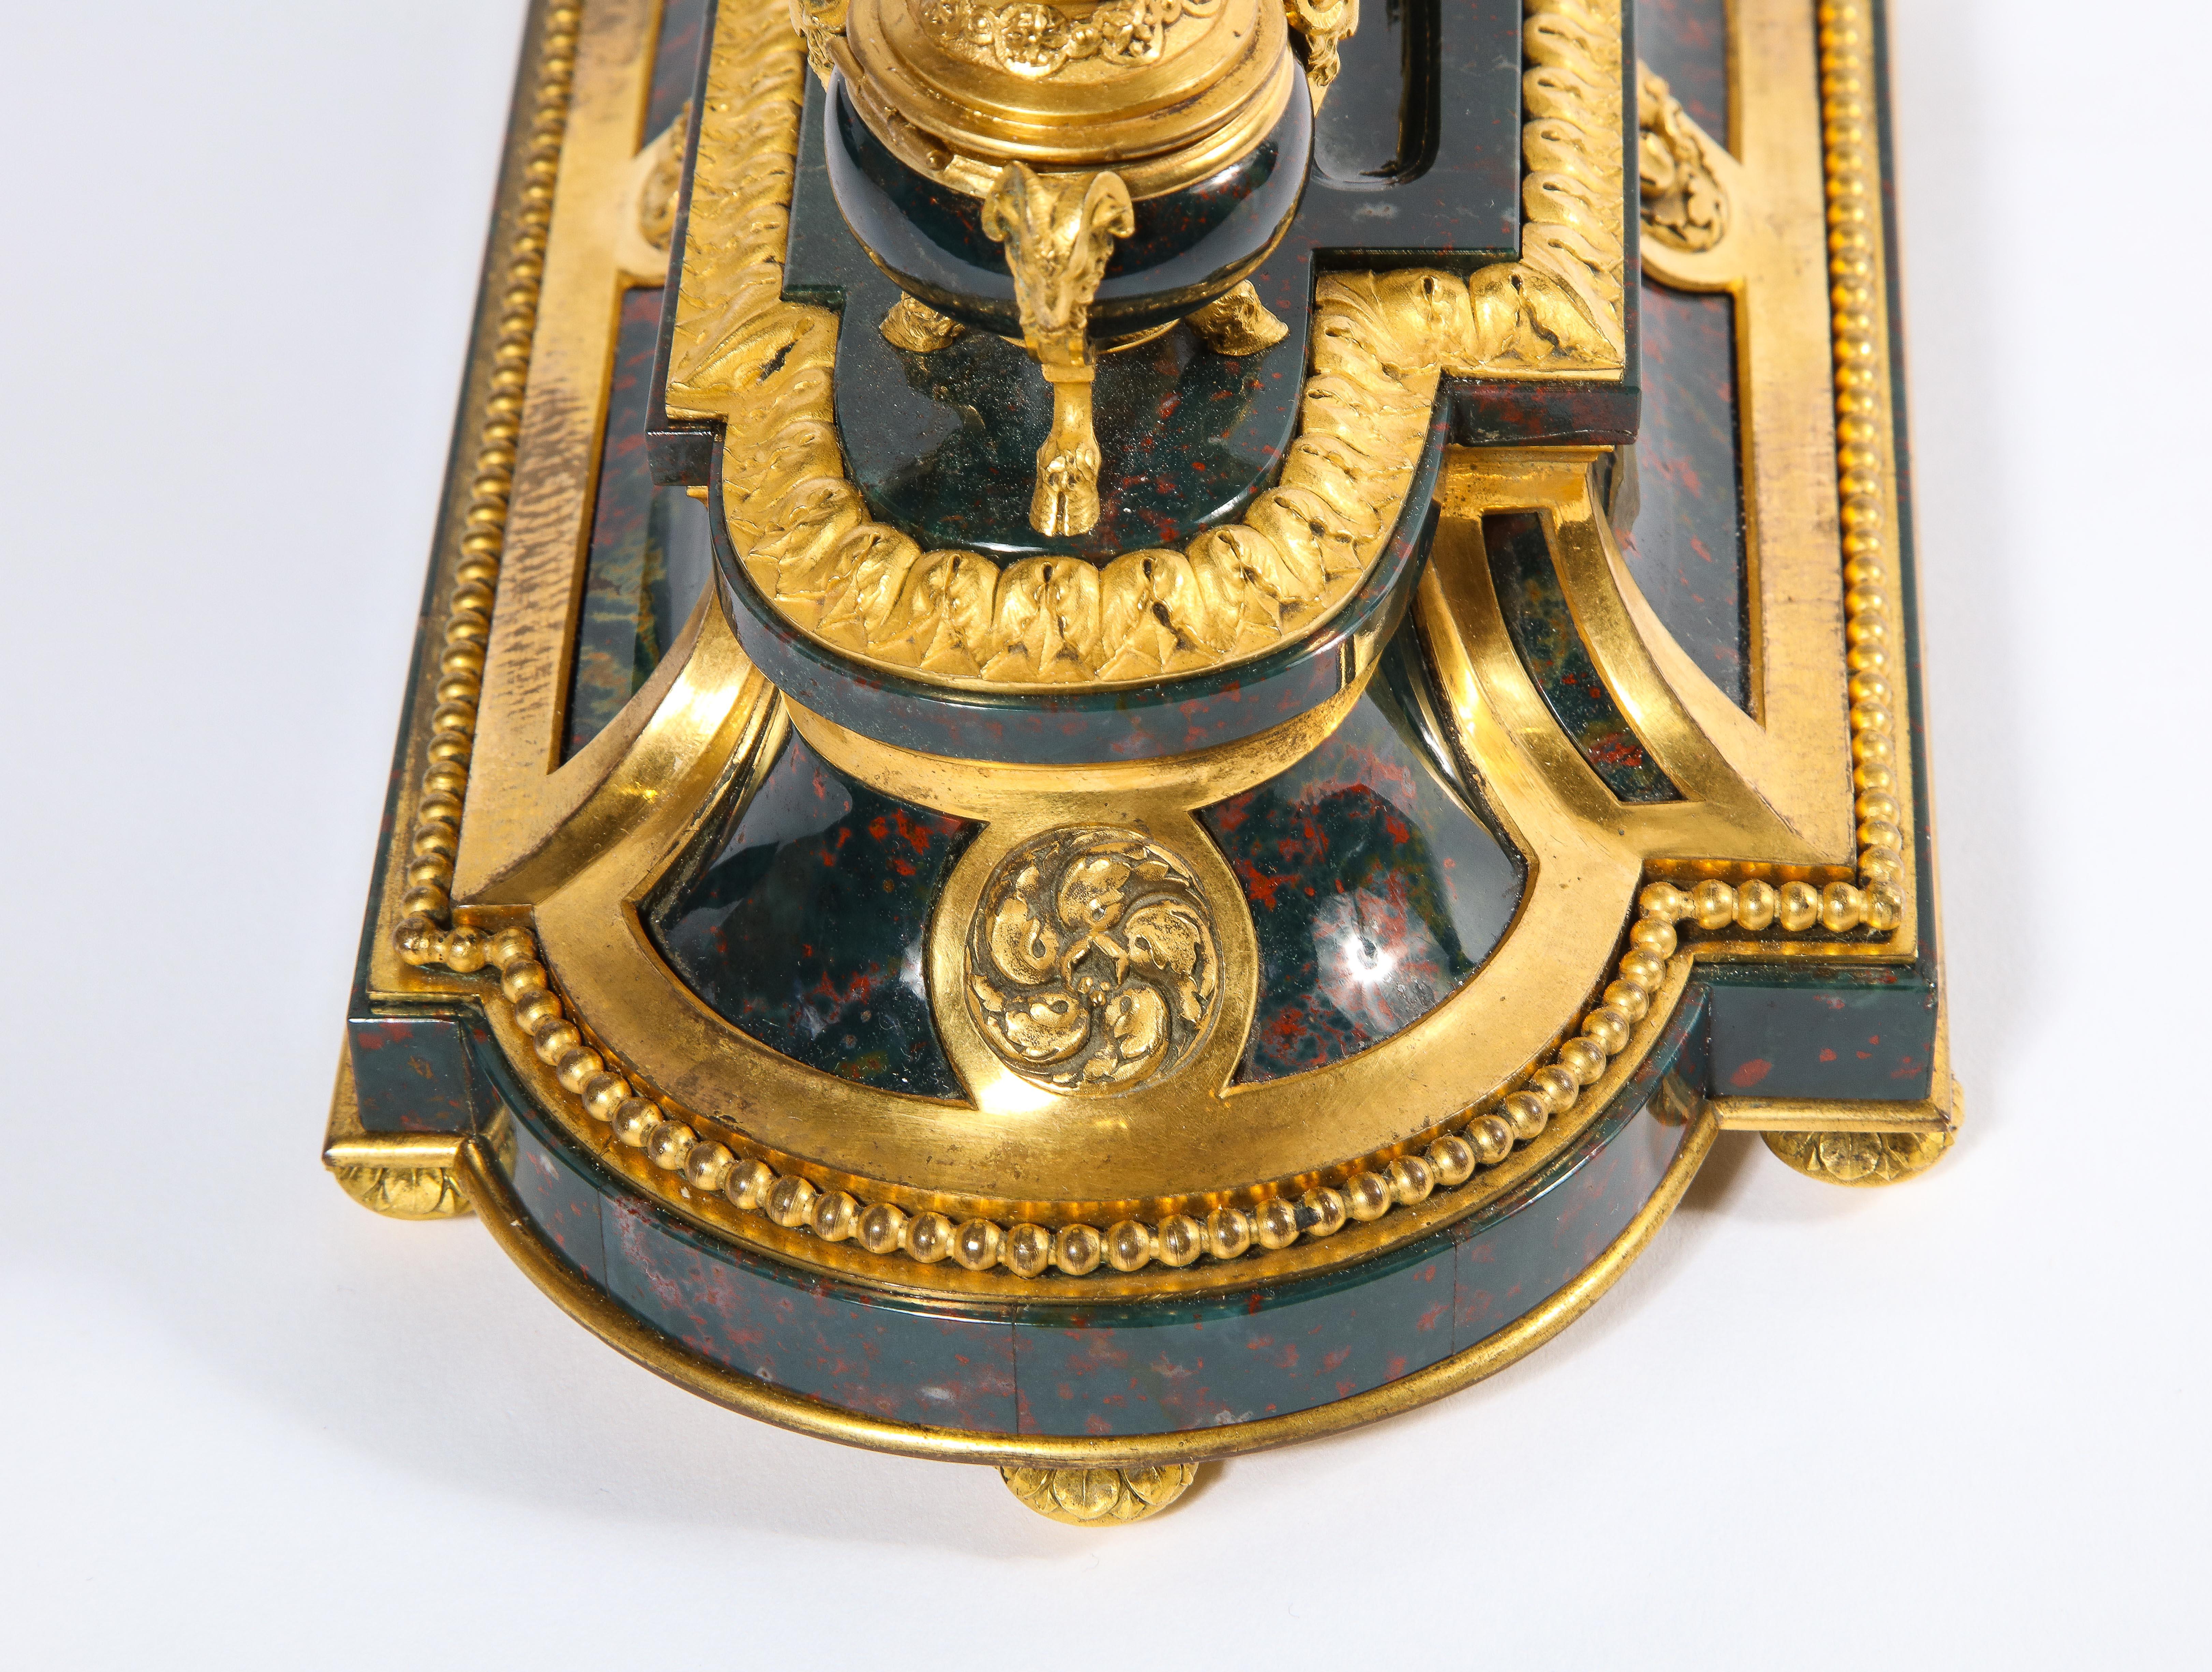 An Exquisite and Rare French Louis XVI Style Ormolu-Mounted Bloodstone Inkwell For Sale 2